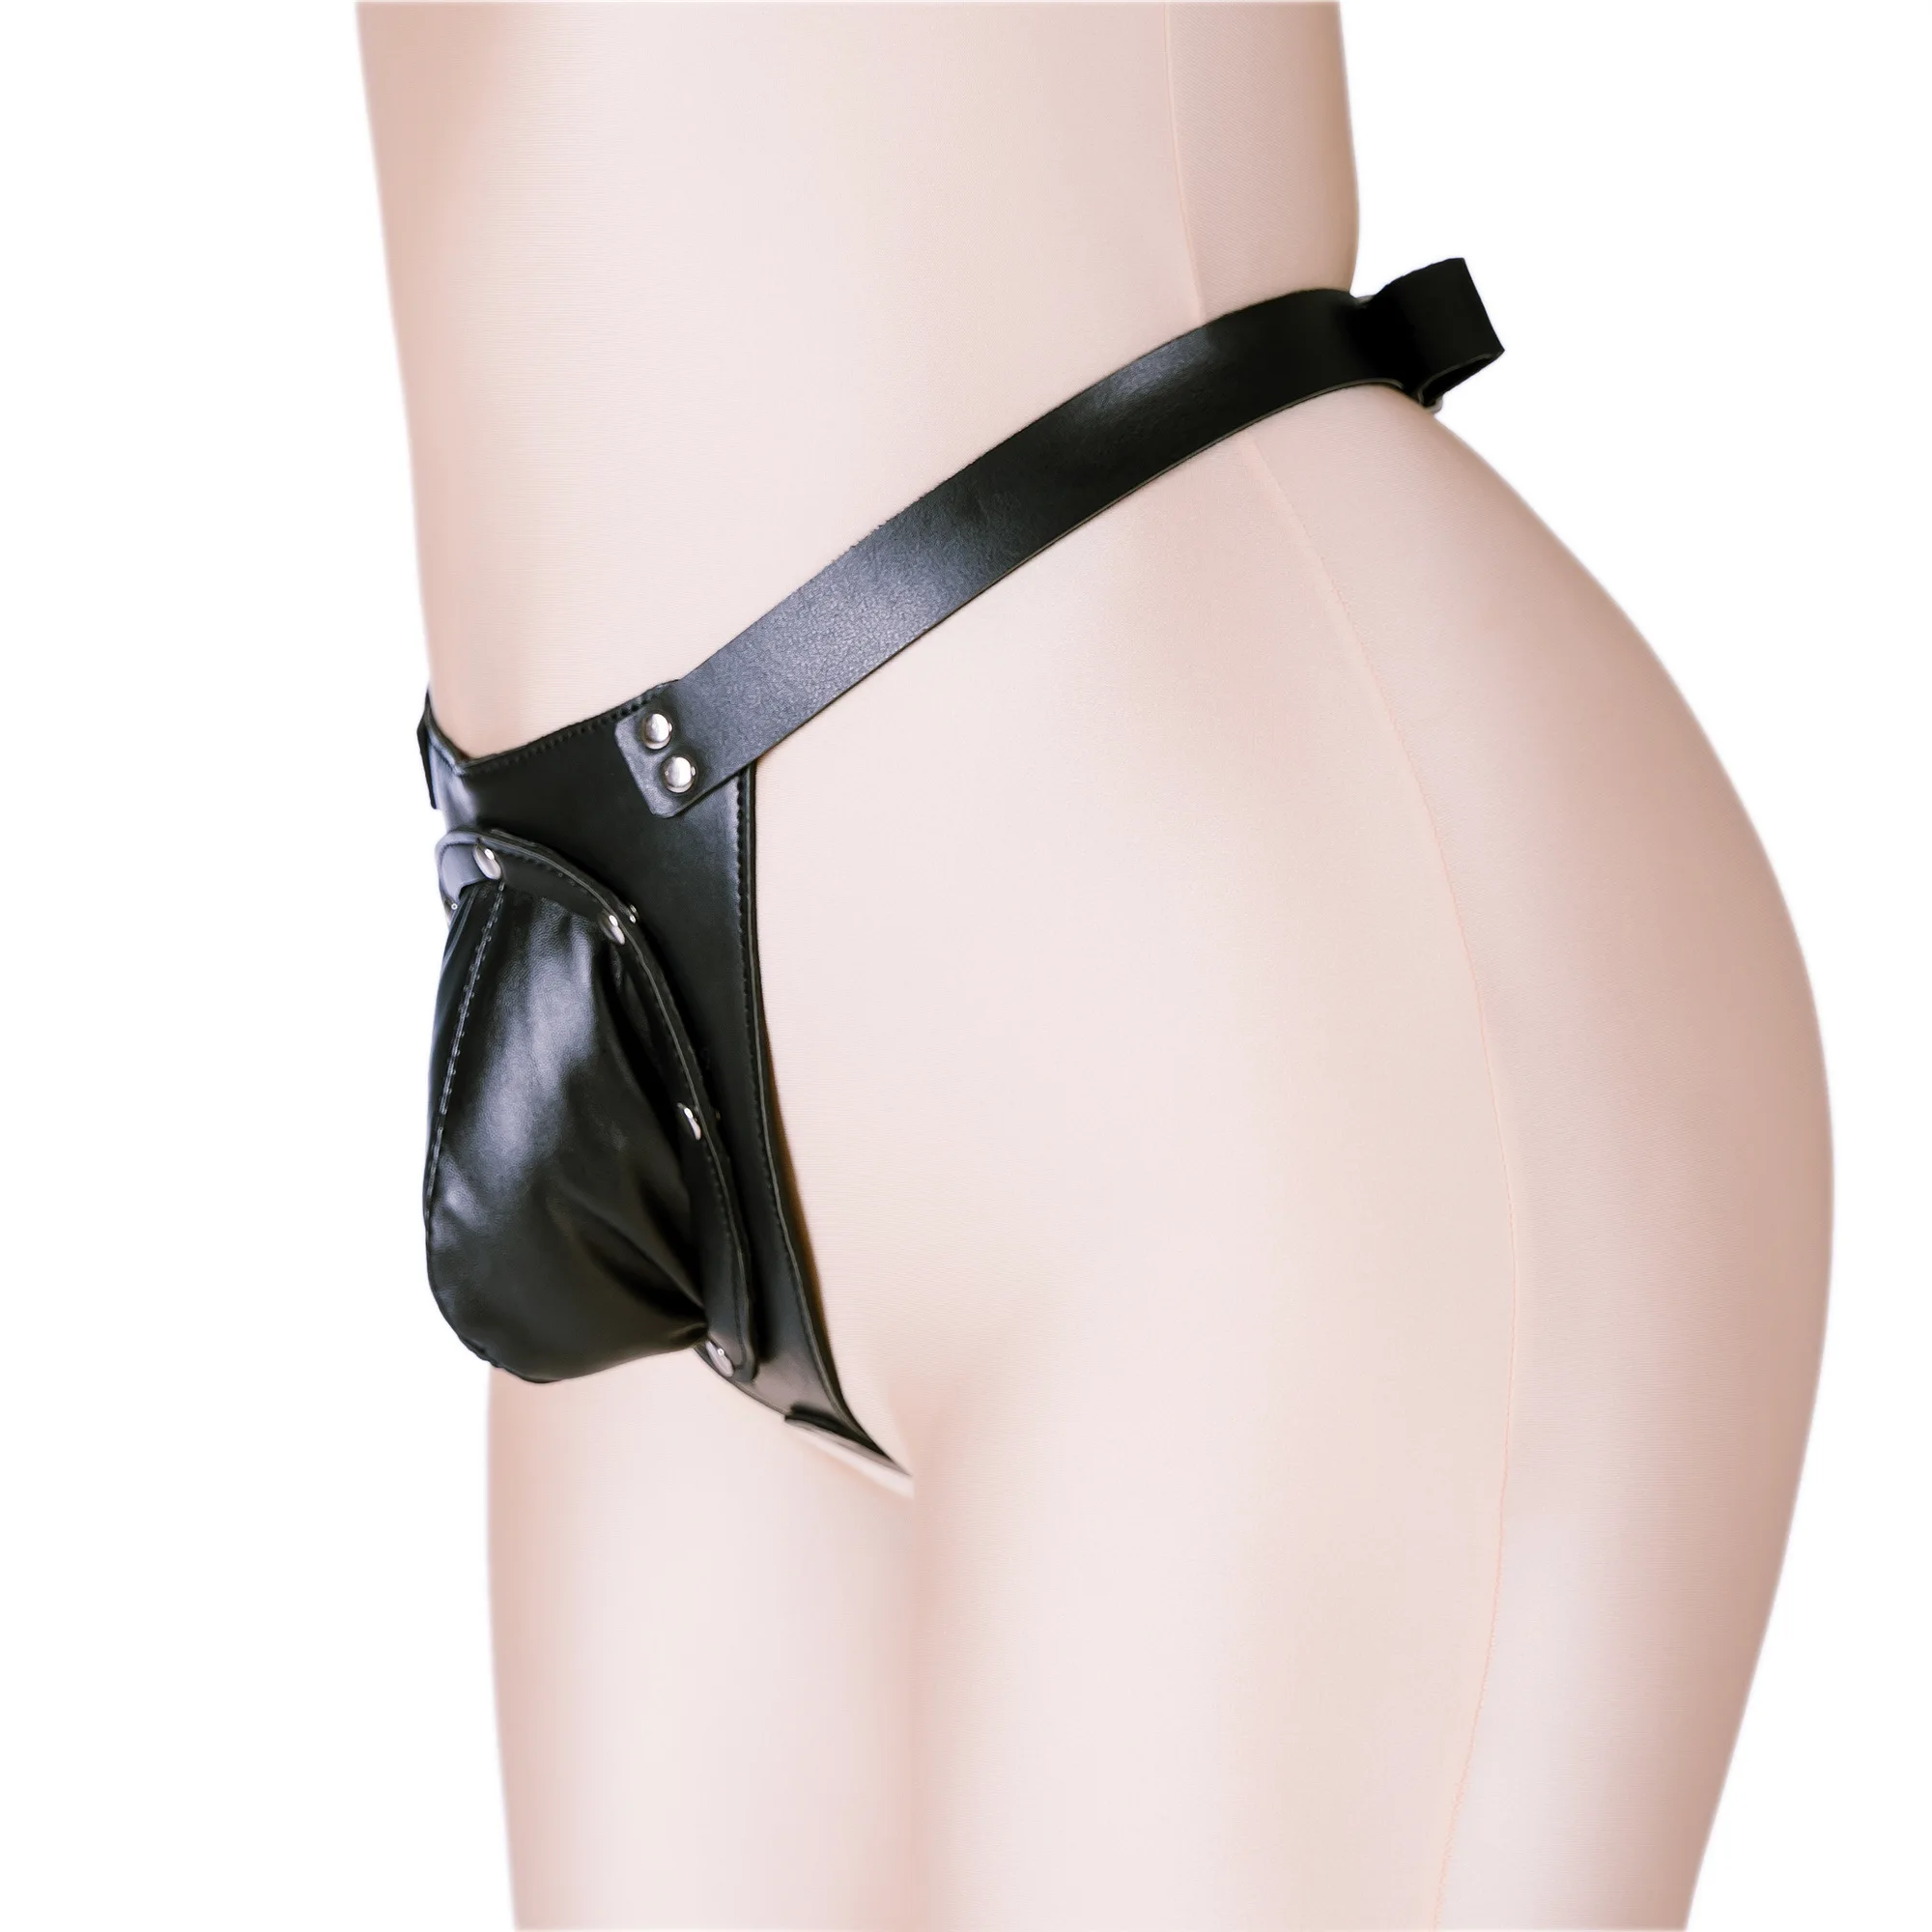 

Sexy Costume Erotic Leather Thong Panty And Detachable Penis Cock Cage,SM Bondage Panties,Adjustable Men's Chastity Belt Sex Toy